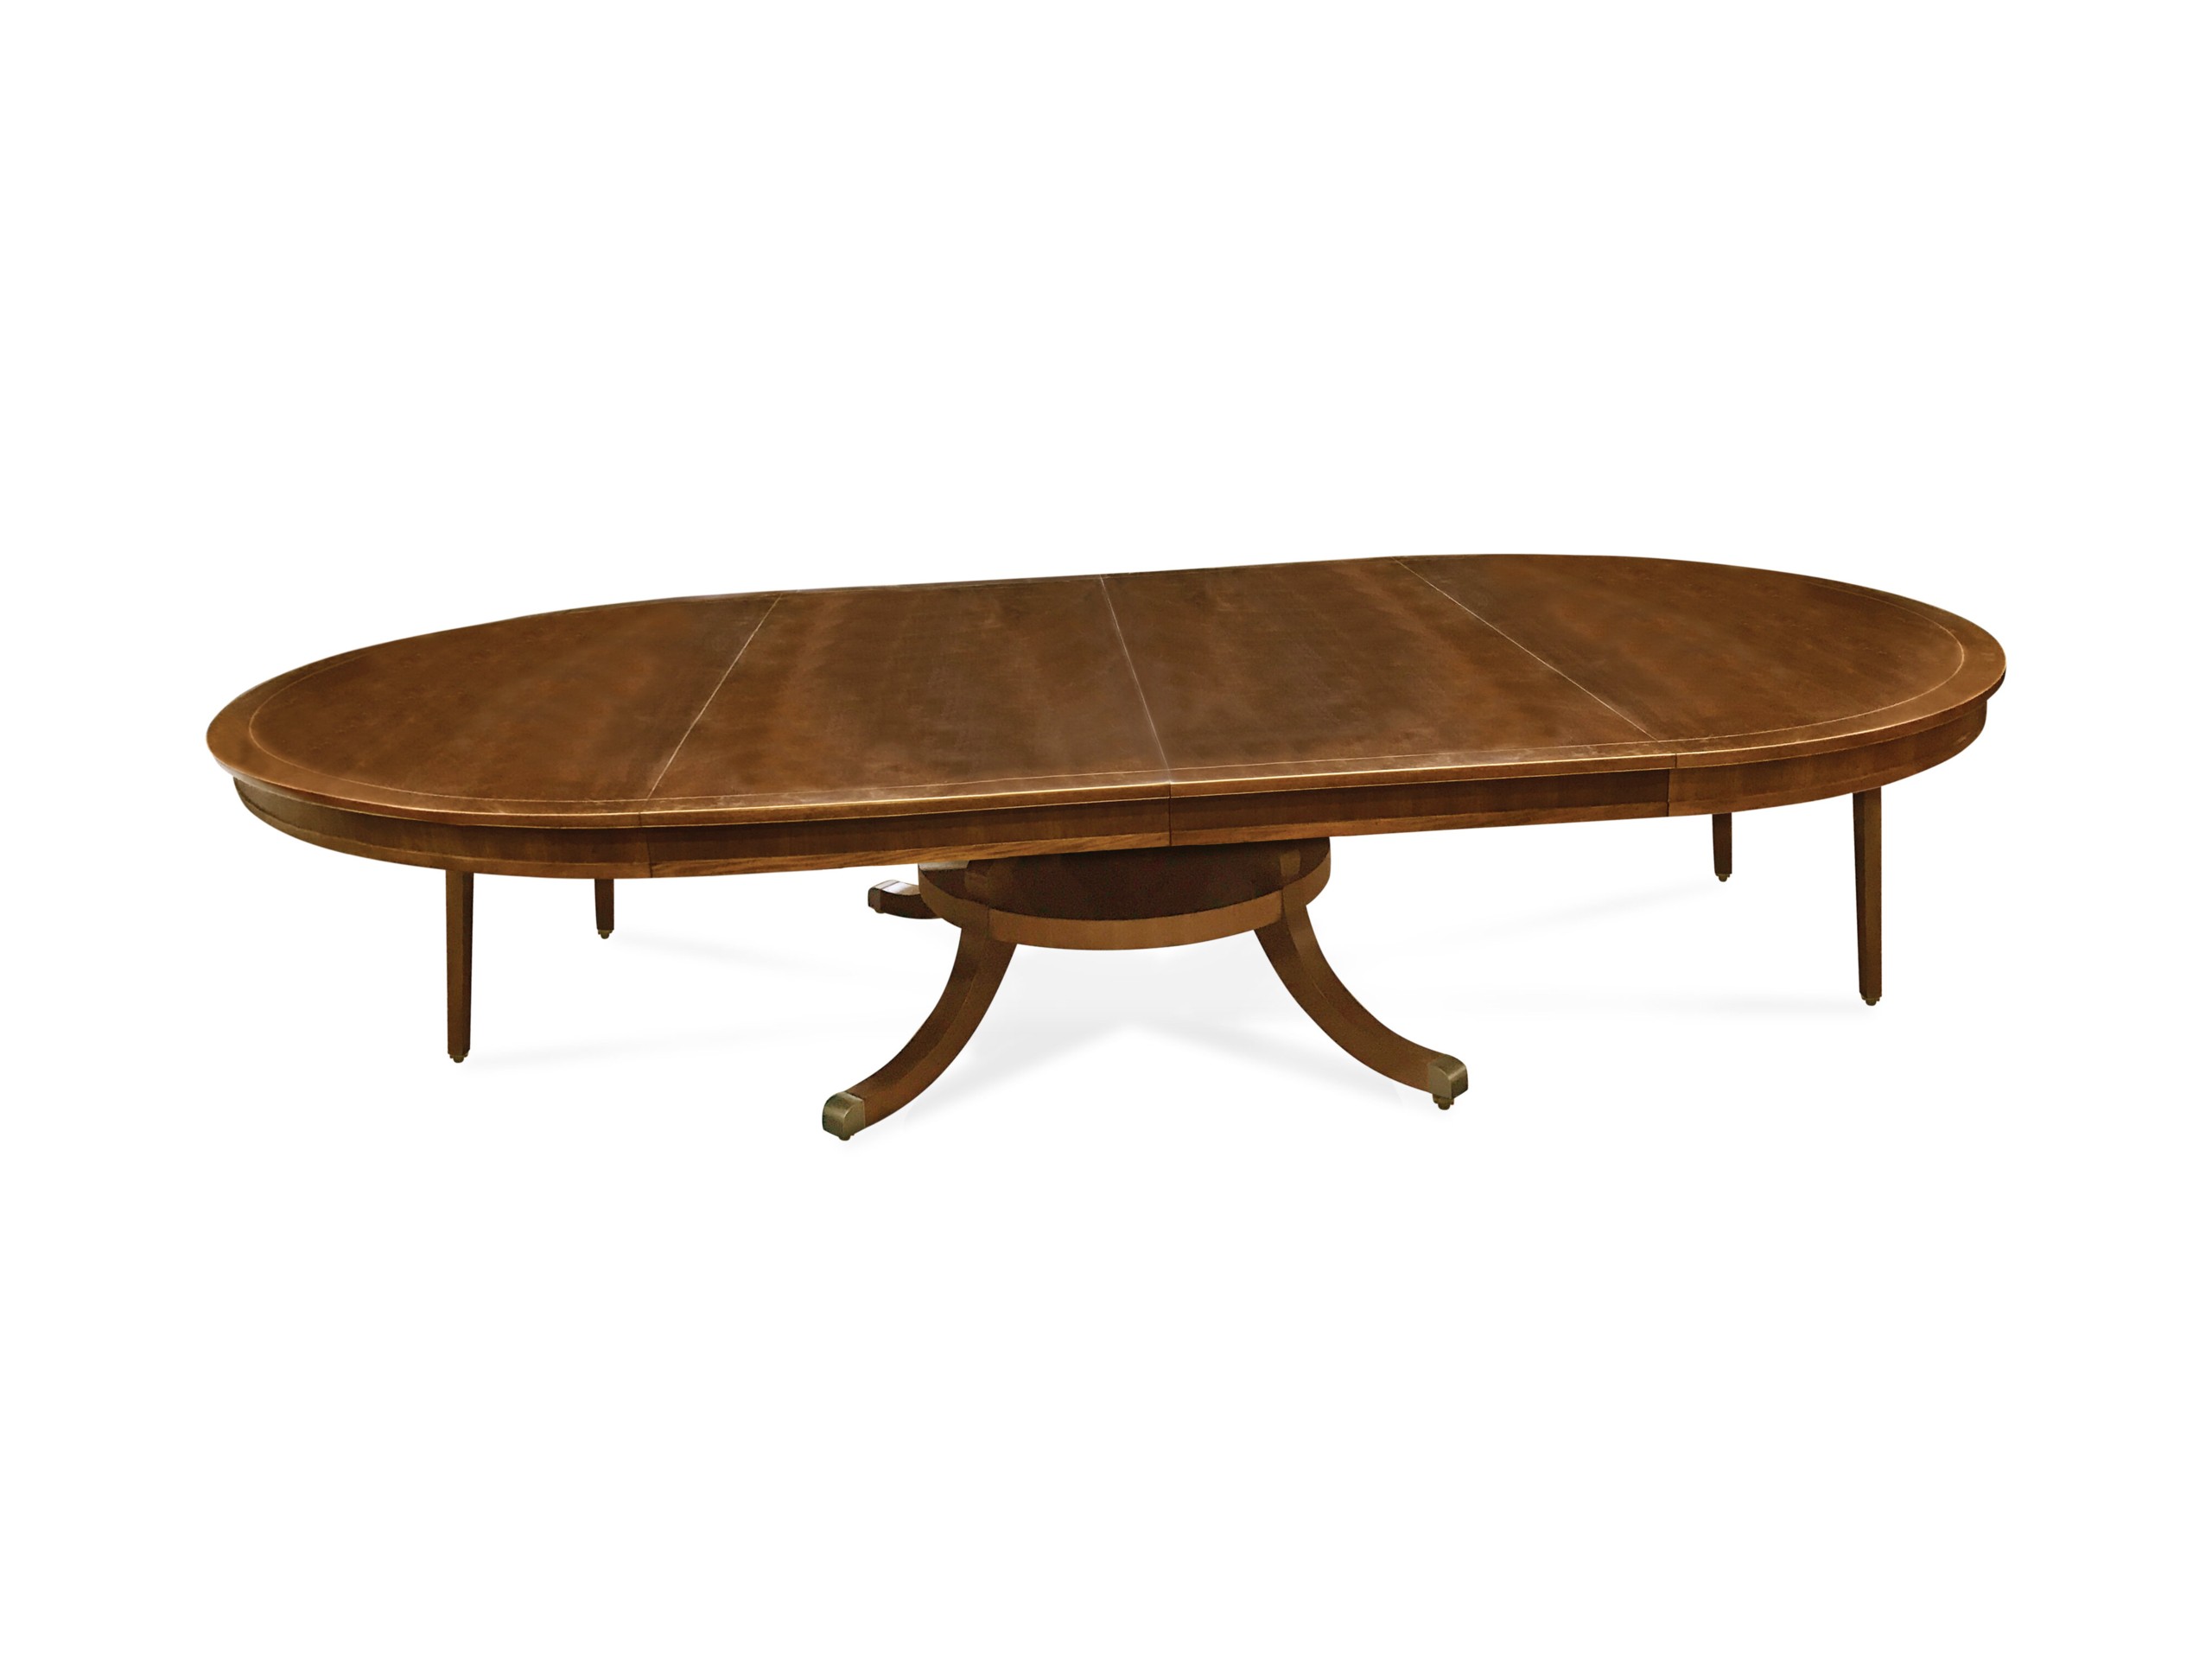 Churchman Empire Imperial Extendable Solid Wood Dining Table